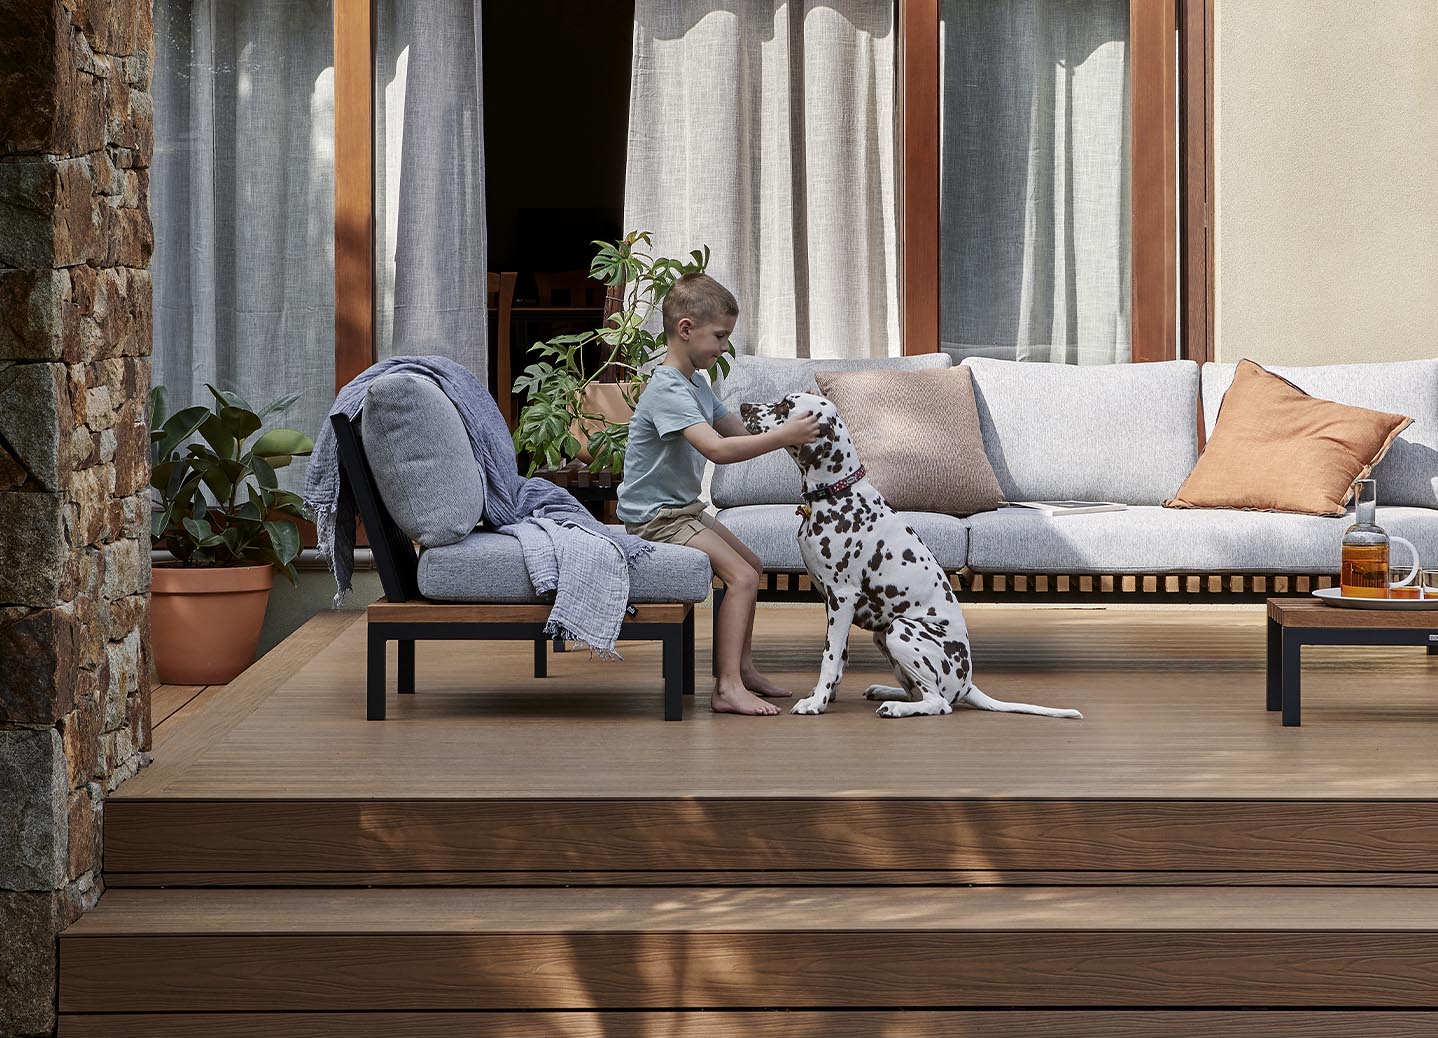 A young boy and a dalmatian on a wooden composite decking.